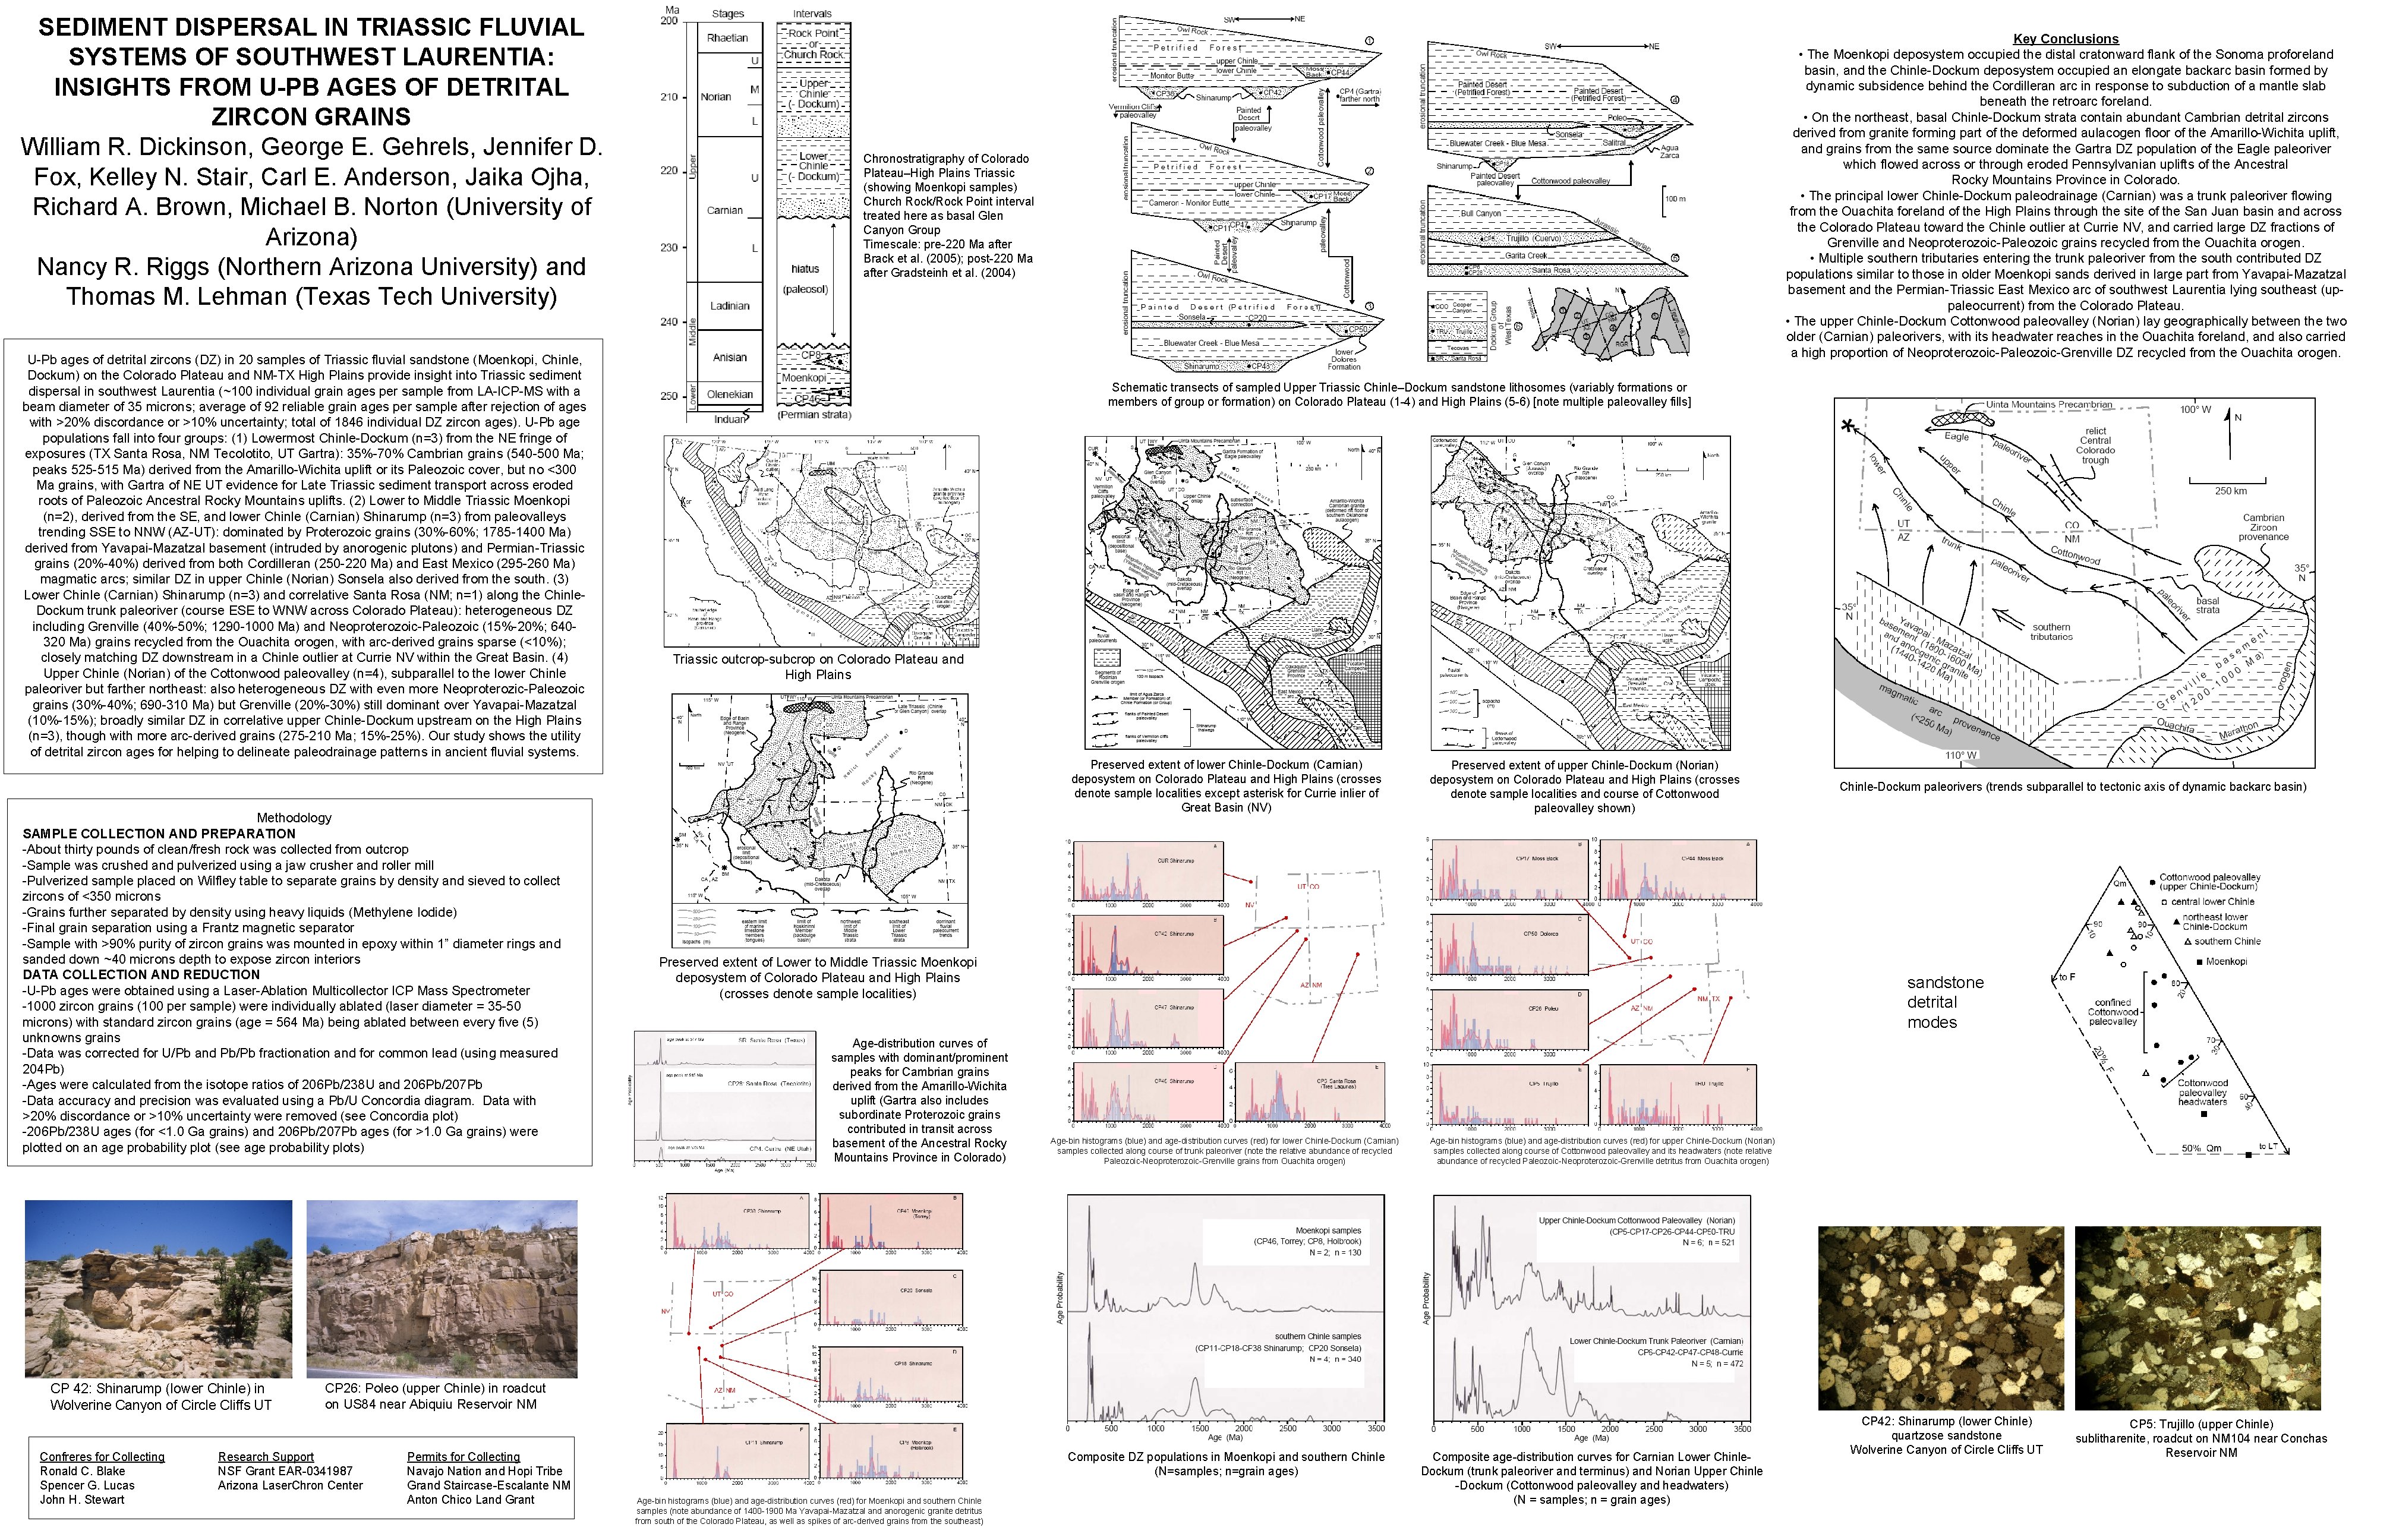 SEDIMENT DISPERSAL IN TRIASSIC FLUVIAL SYSTEMS OF SOUTHWEST LAURENTIA: INSIGHTS FROM U-PB AGES OF